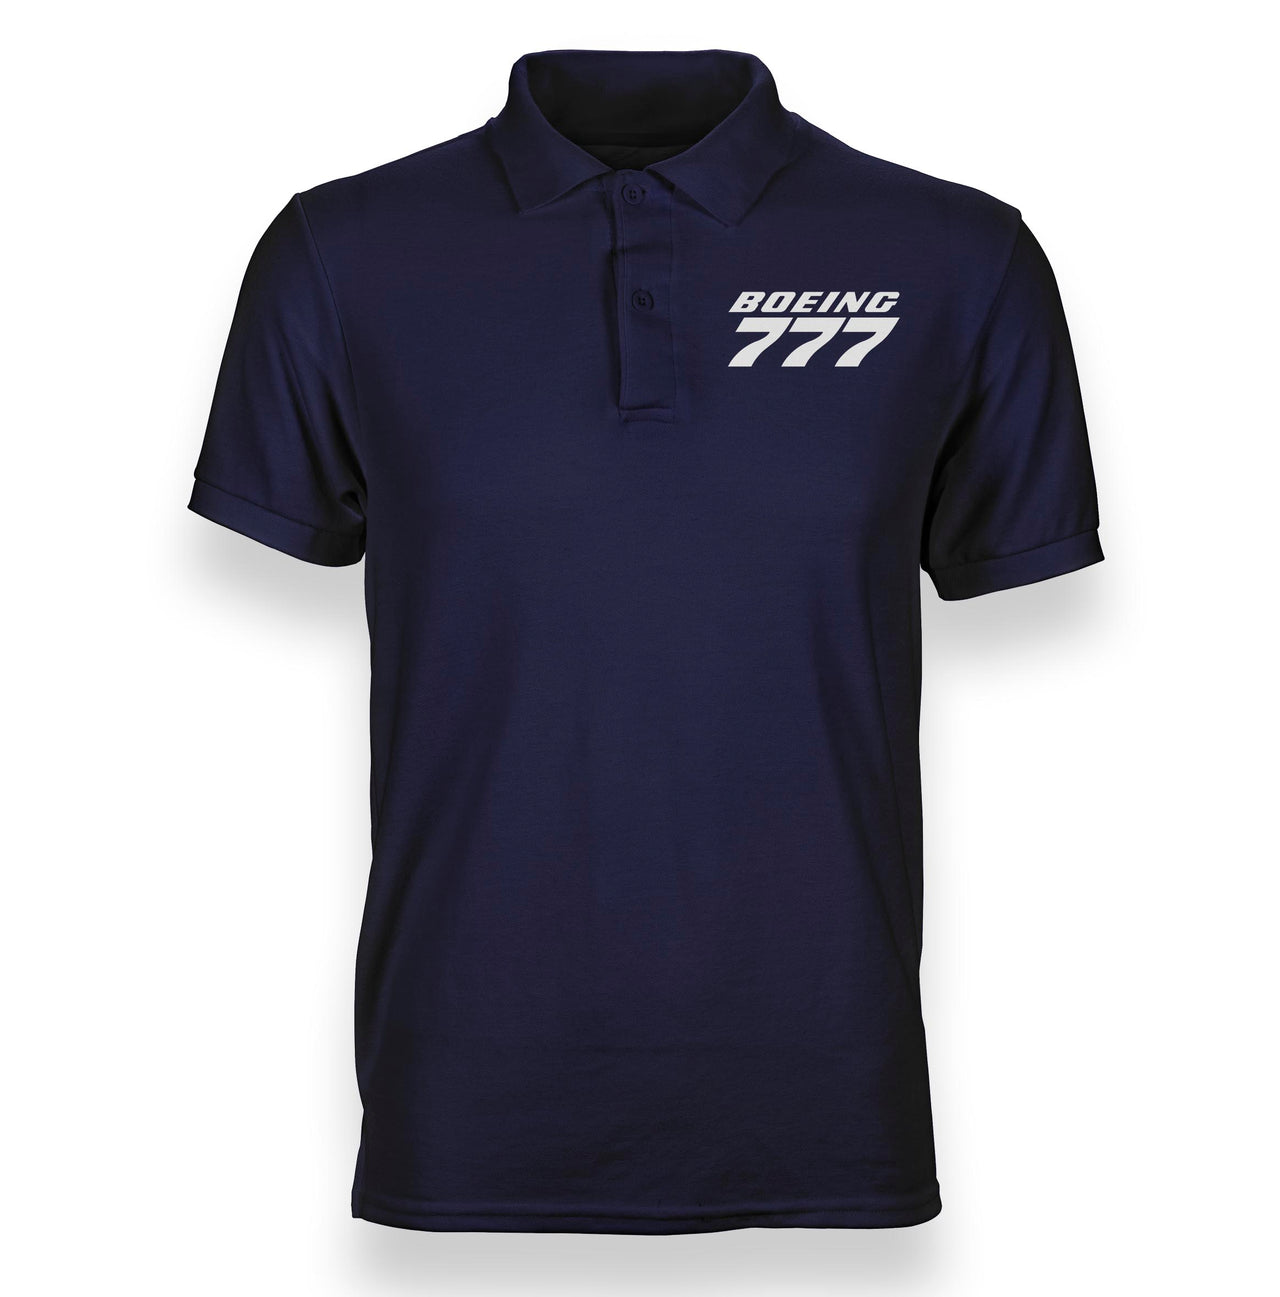 Boeing 777 & Text Designed Polo T-Shirts